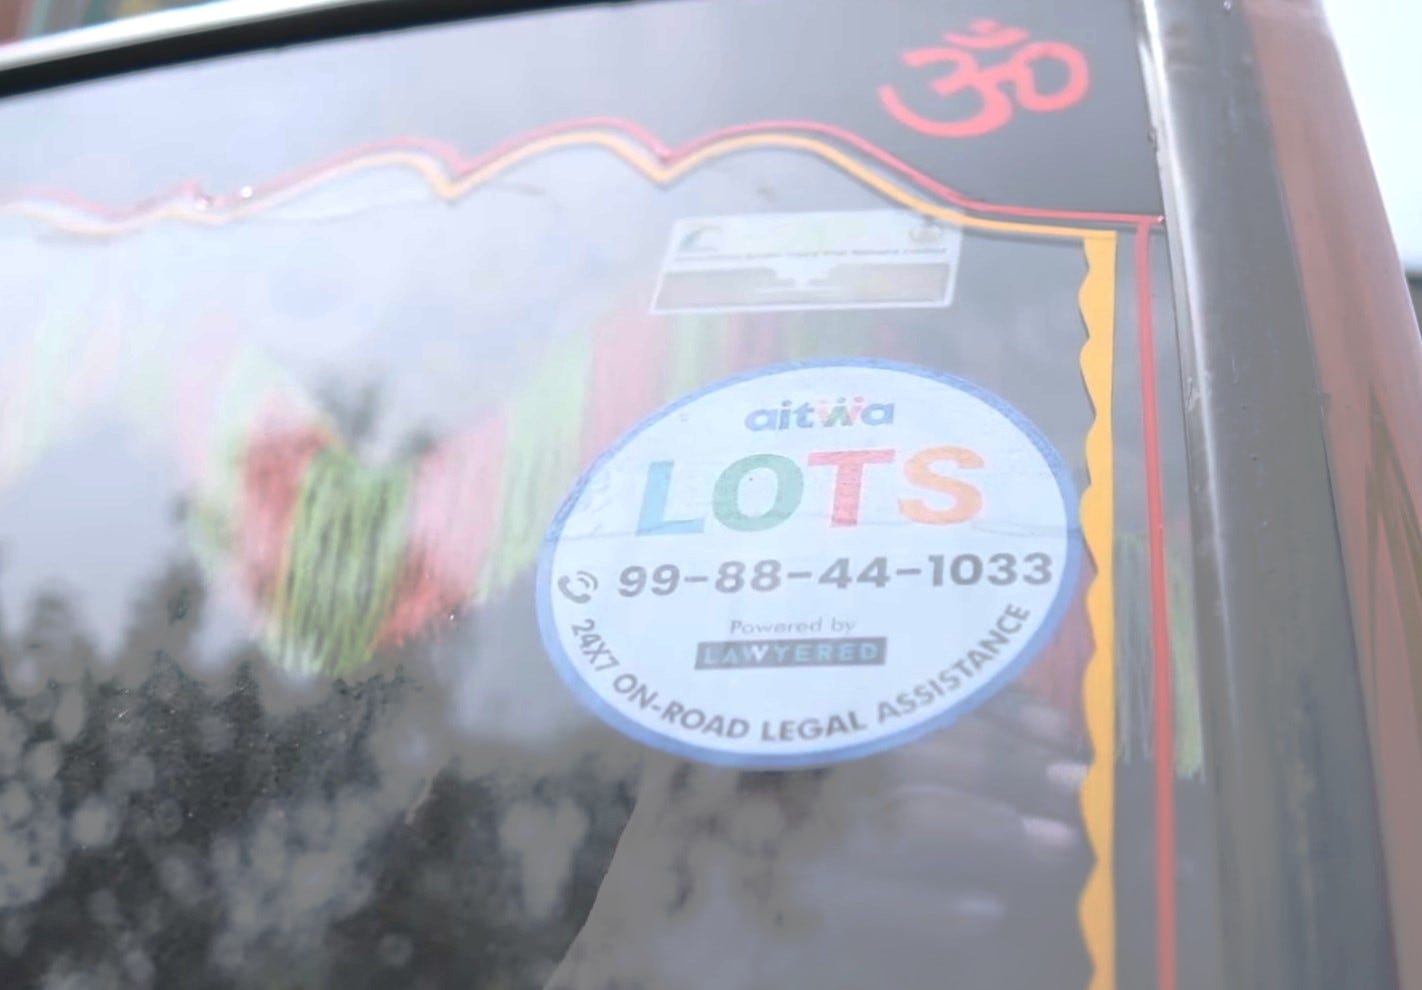 Image of a truck window carrying the sticker for LOTS helpline number